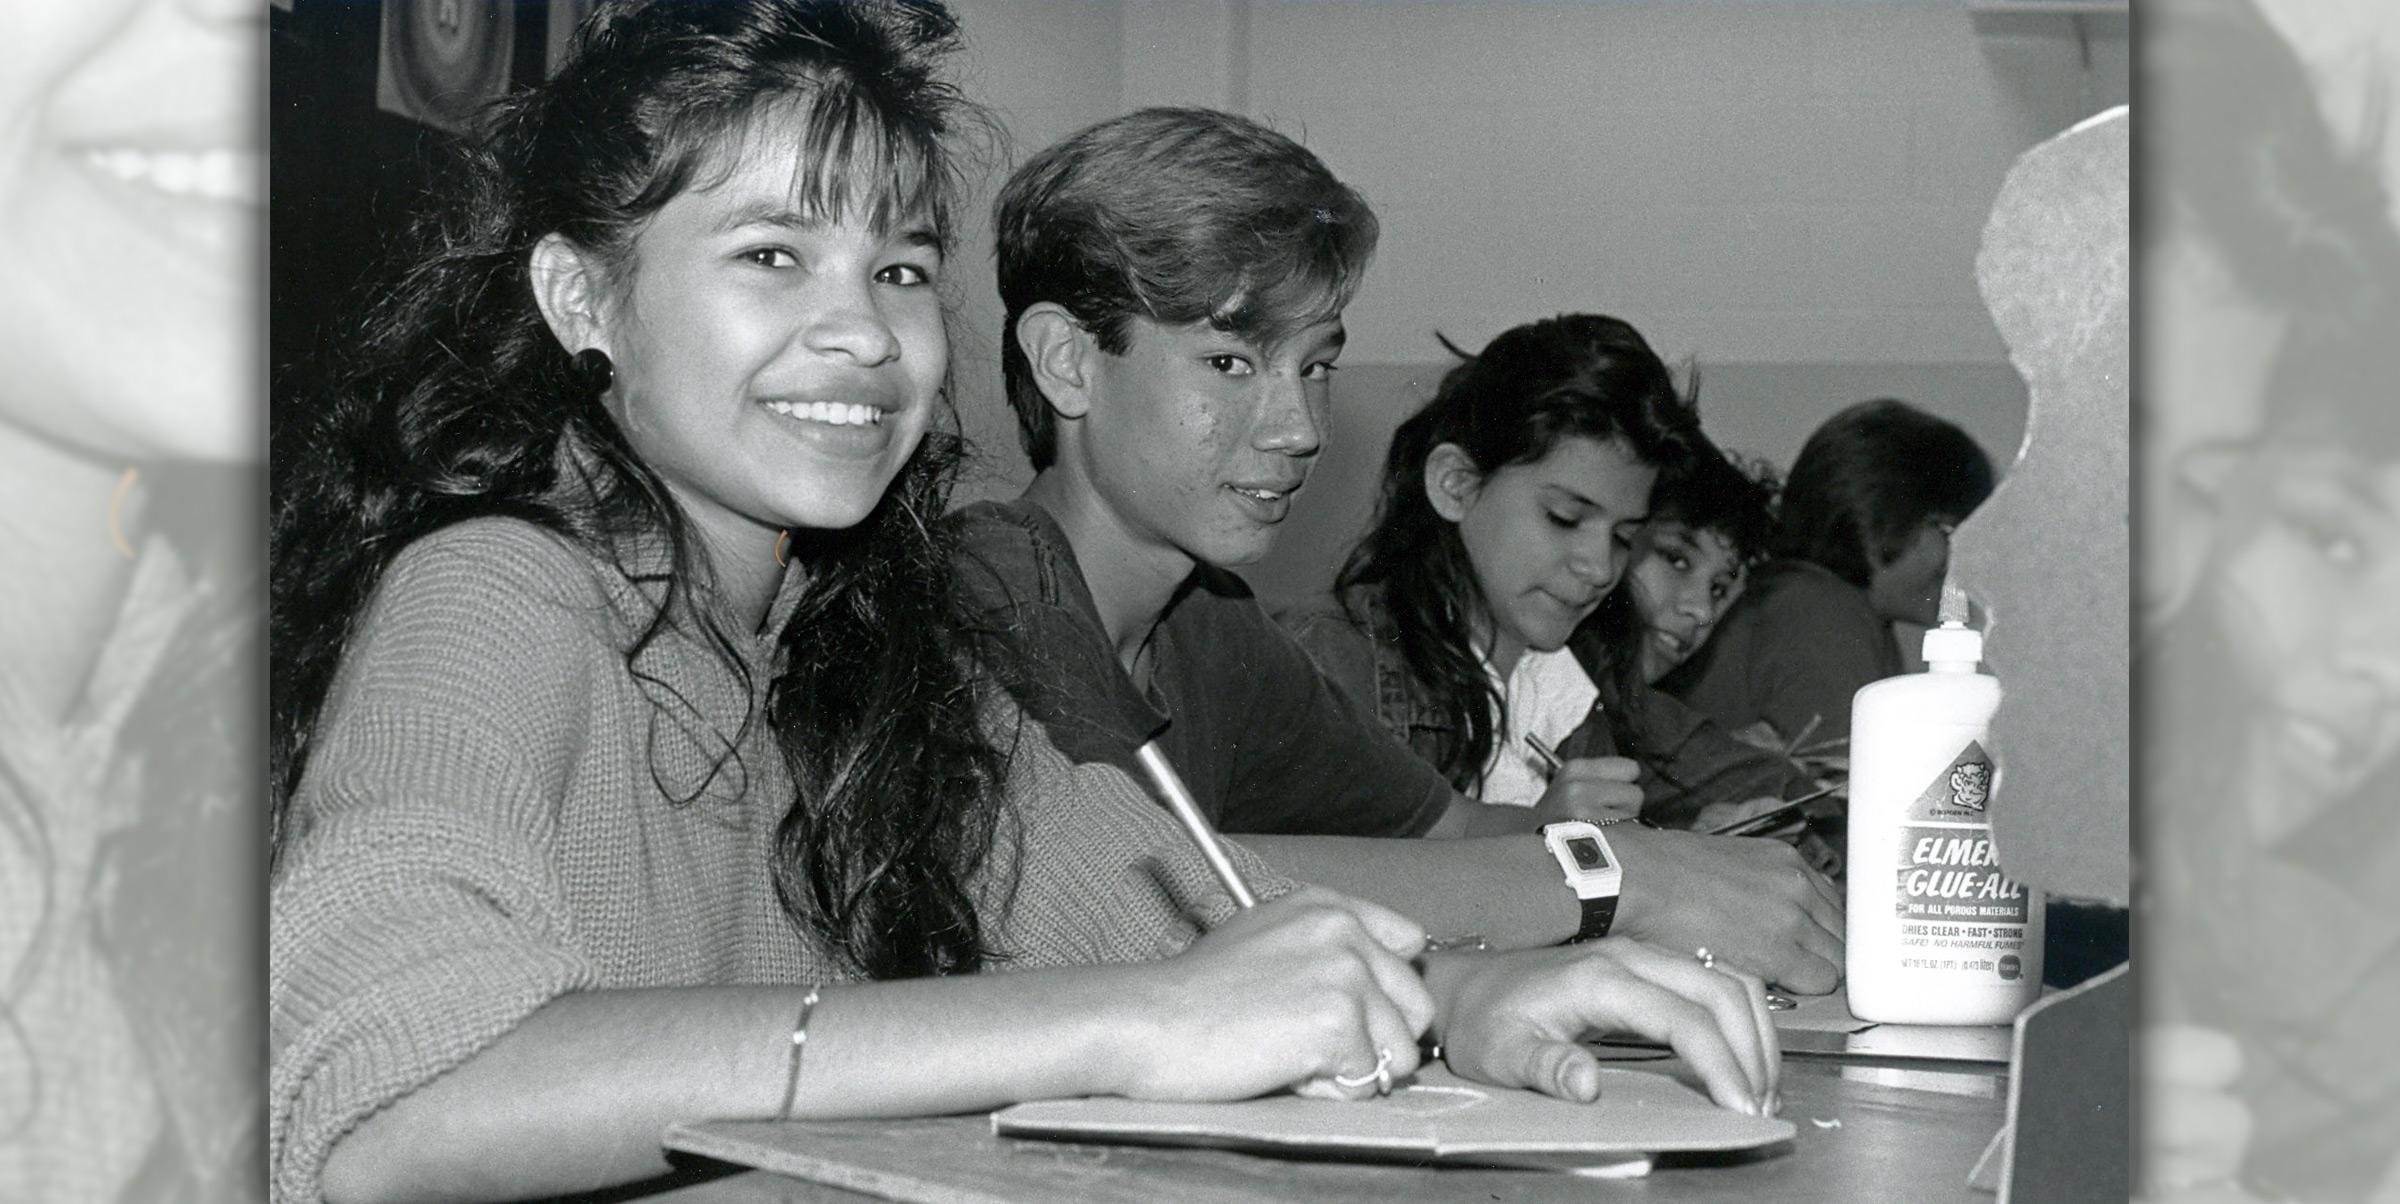 NISD middle school students at their desks 1980s